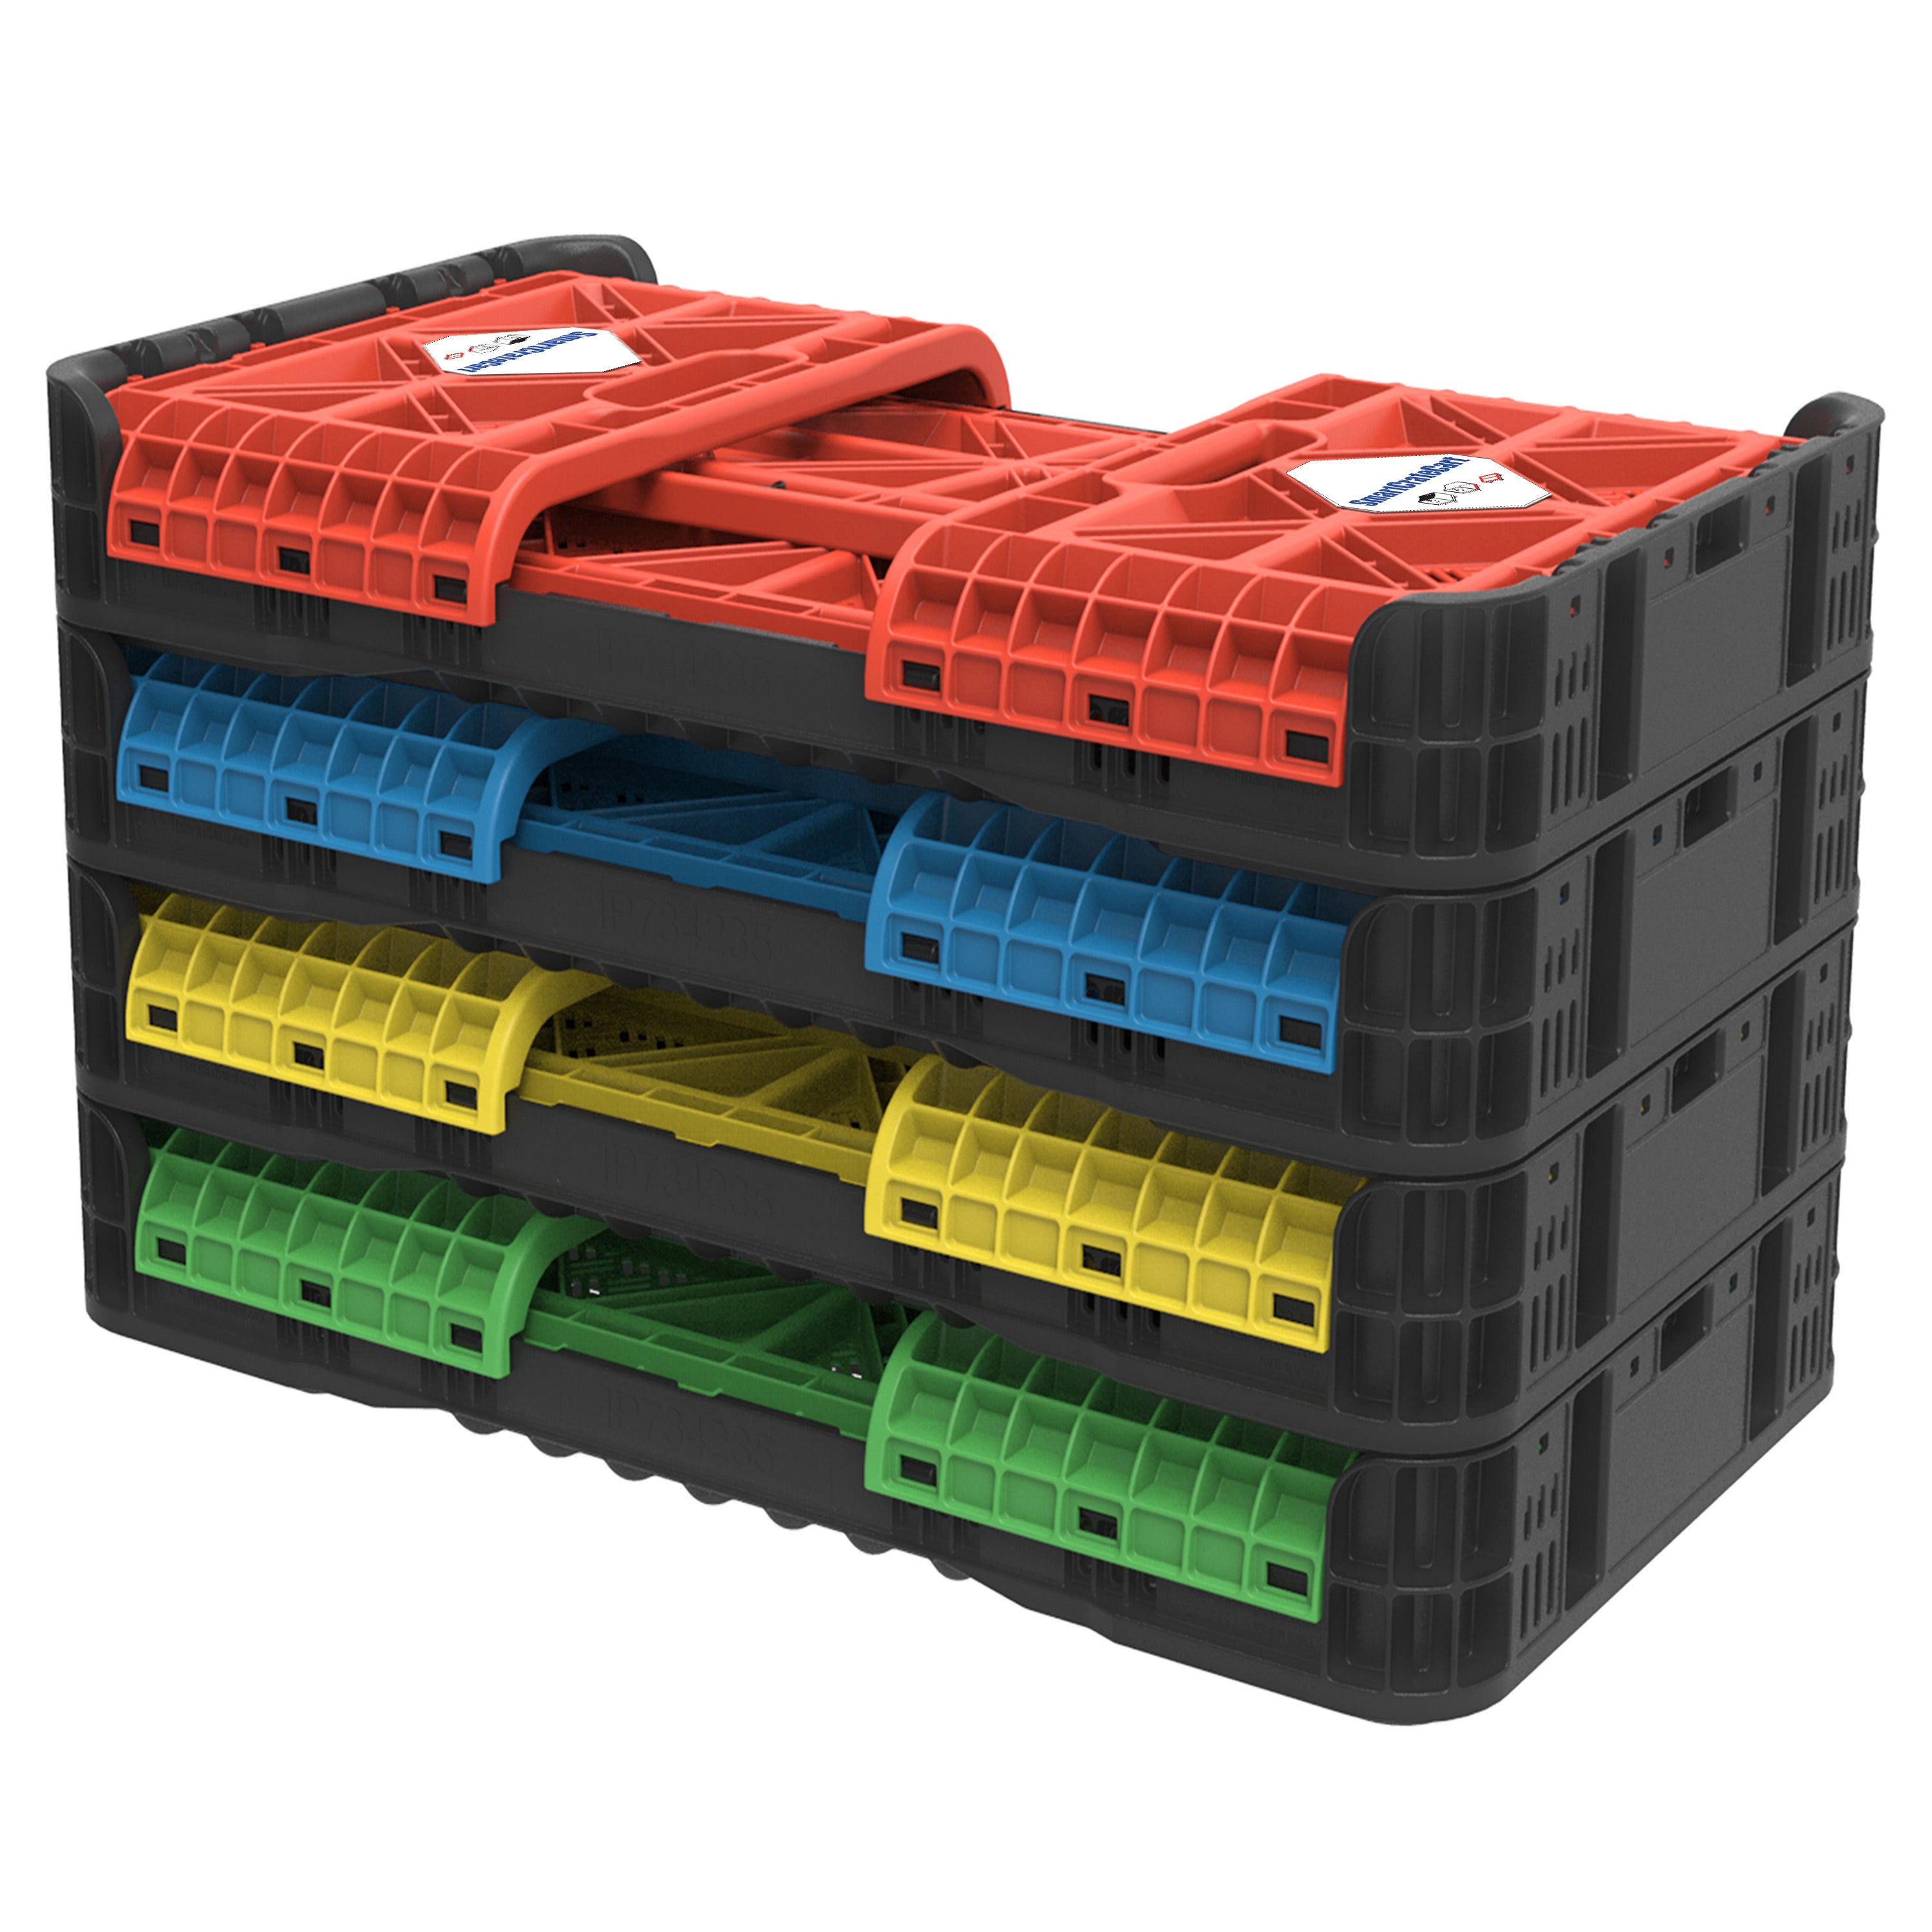 SmartCrateCart 90 Liter (23.8 Gallon) All-Purpose Collapsible and Stackable Storage Crate